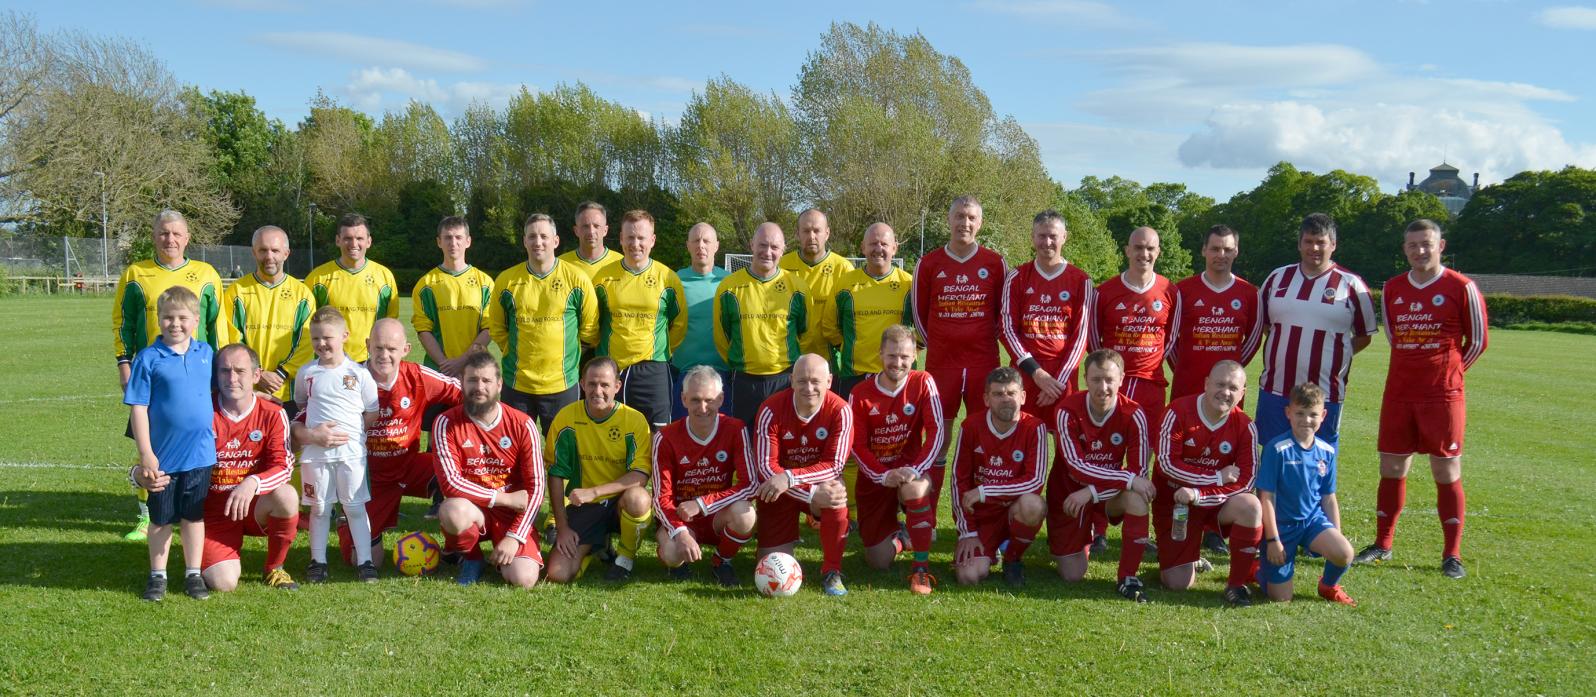 GOLDEN OLDIES: In the annual veterans’ Meet weekend football match, it was a one-sided affair this year, with Bowes running out 8-0 victors against Barnard Castle